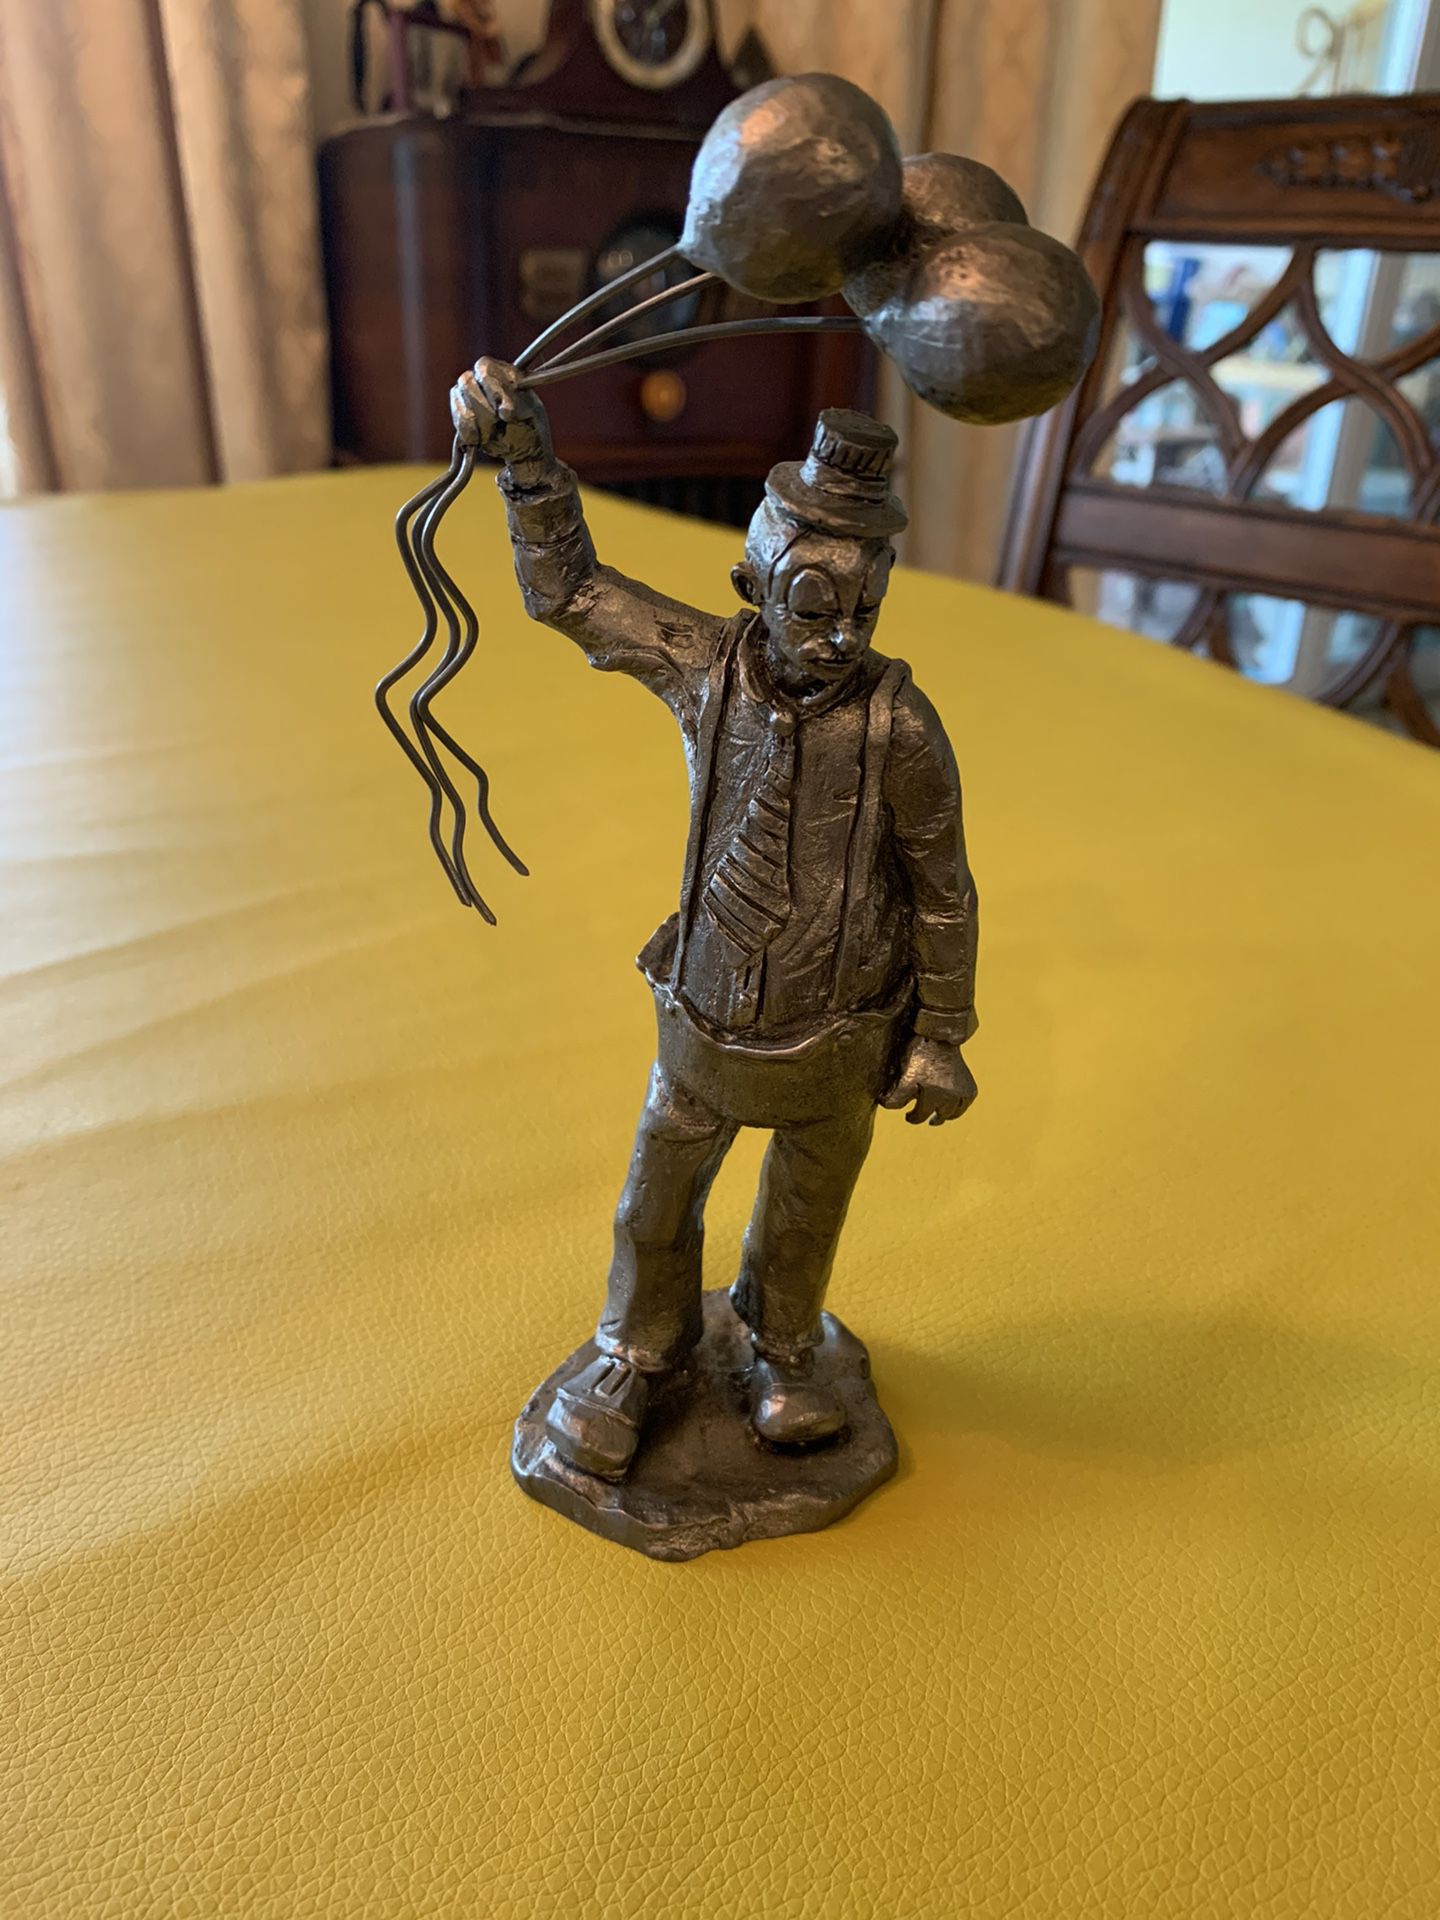 Vintage Heavy Pewter Michael Ricker Clown with Balloons is 7 inches tall